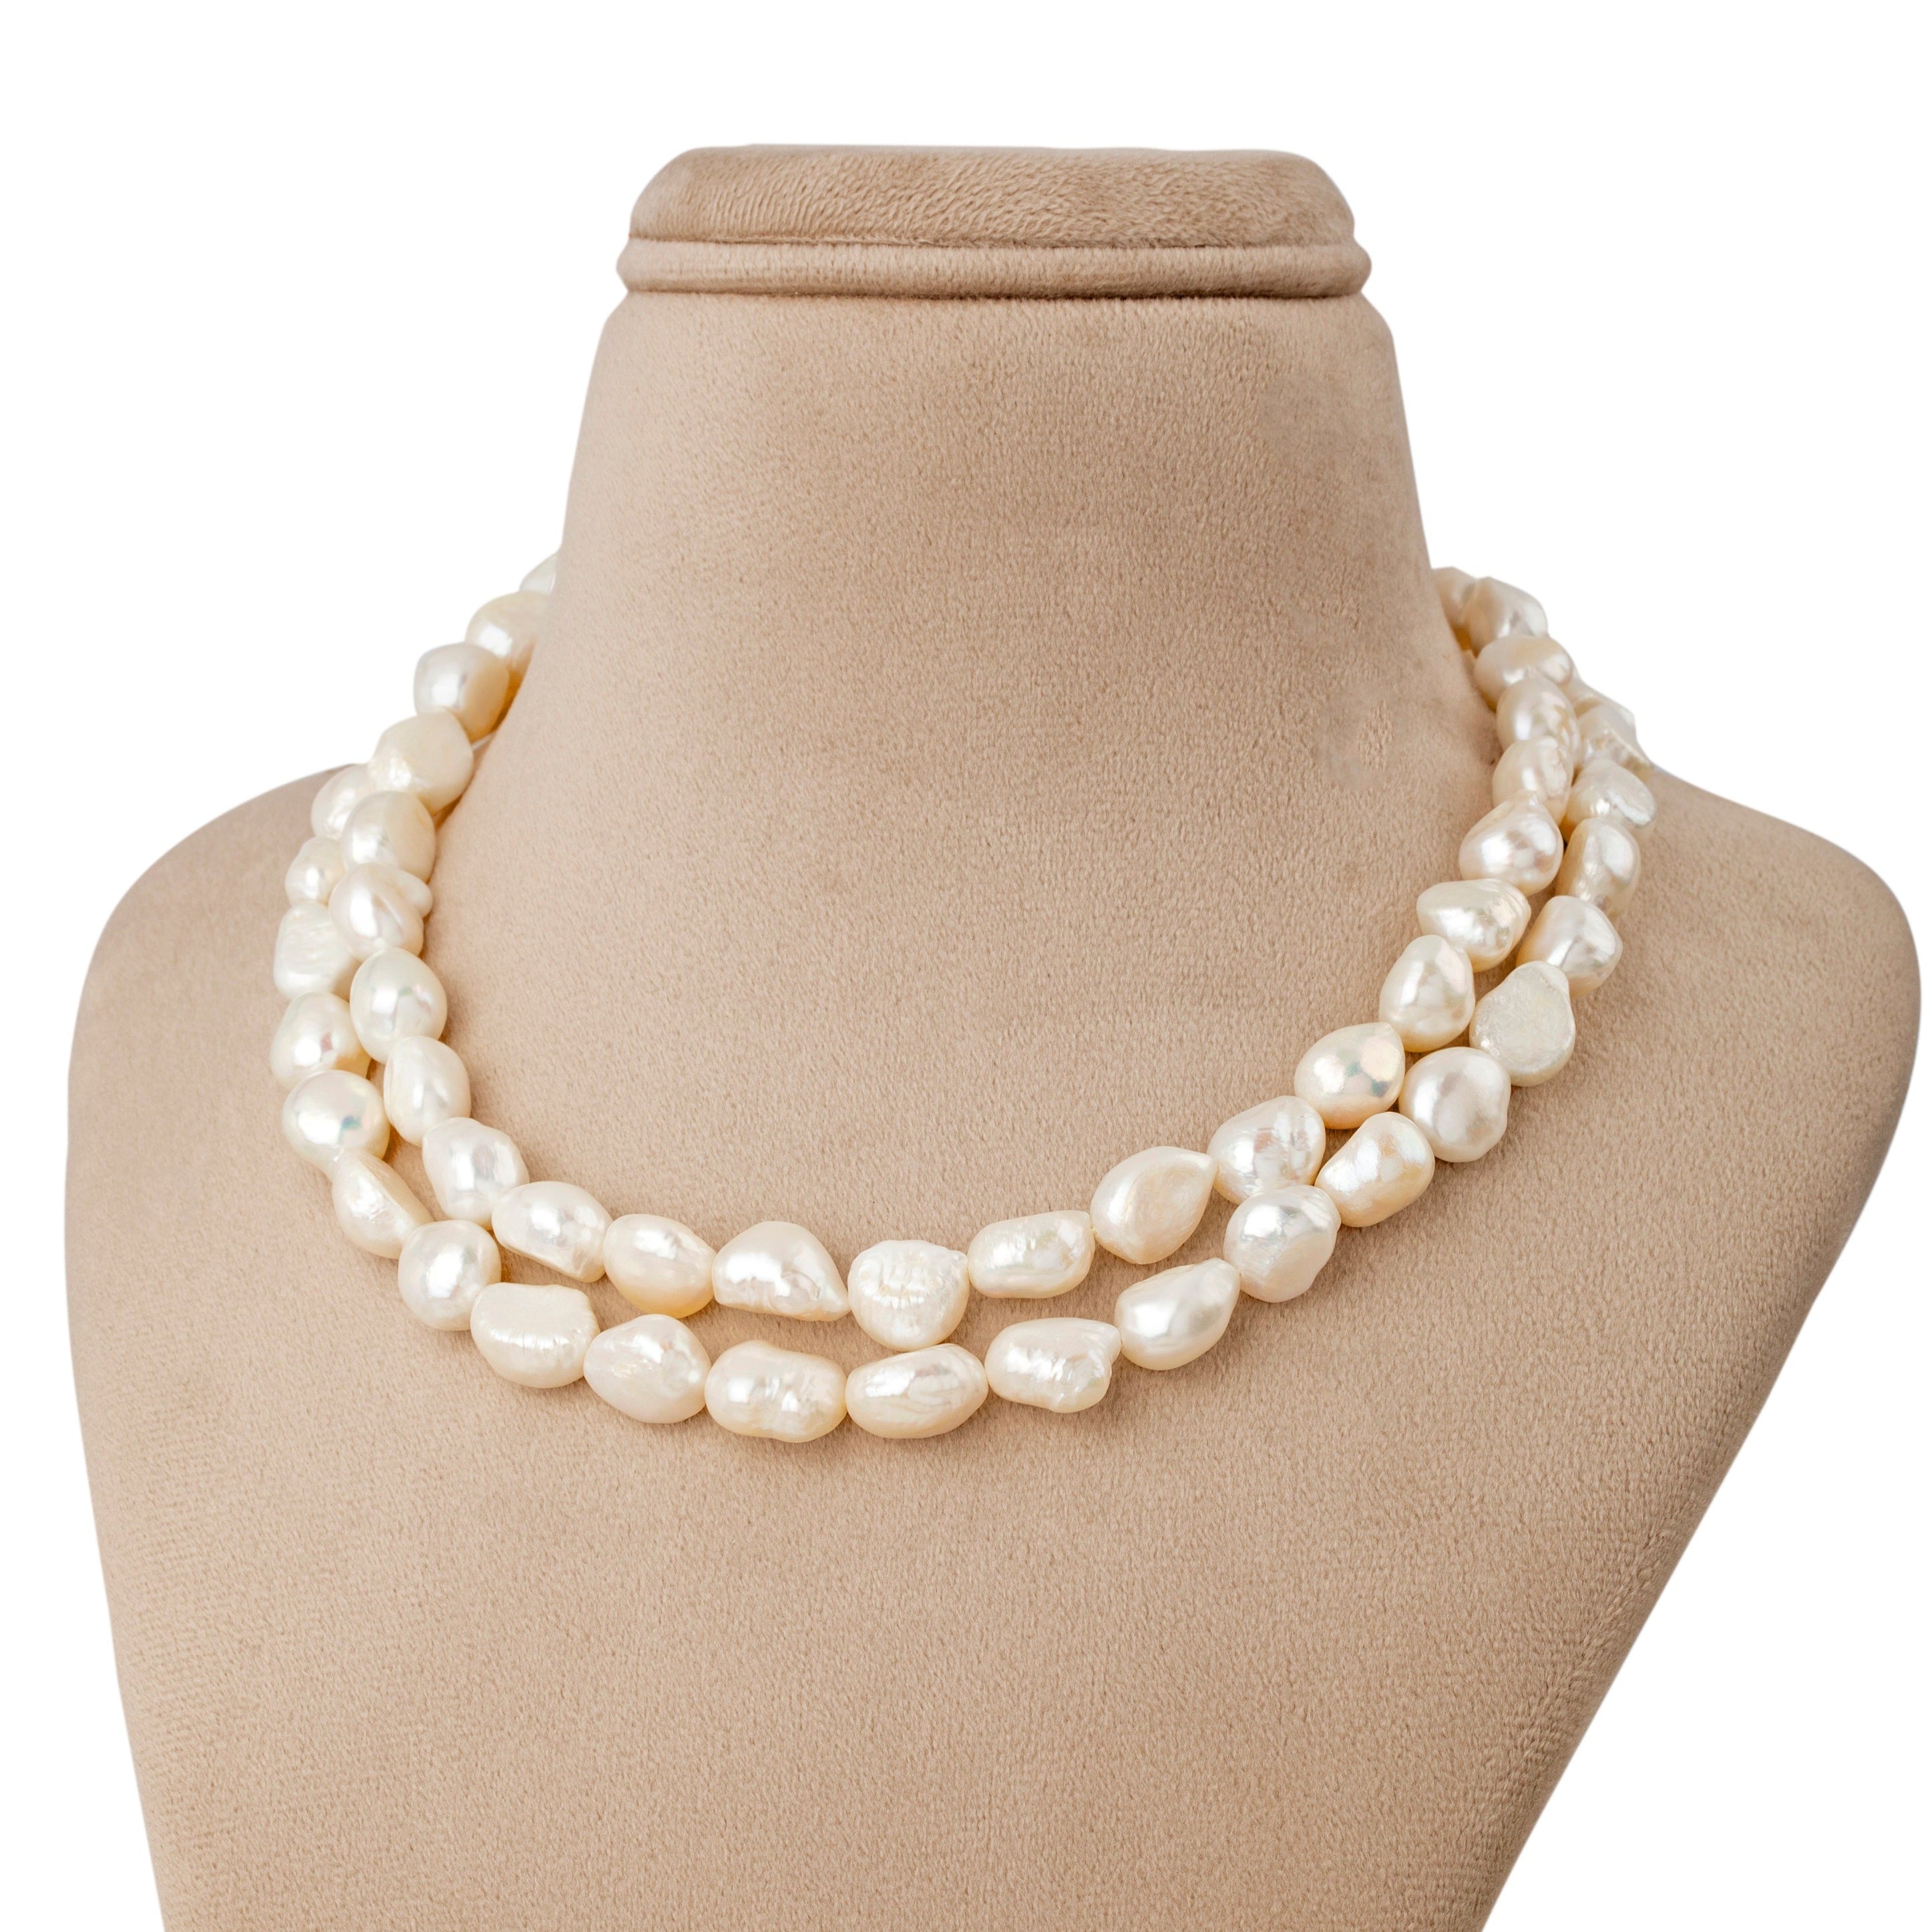 White with Gold Accents Freshwater Pearl Necklace - Made in Hawaii